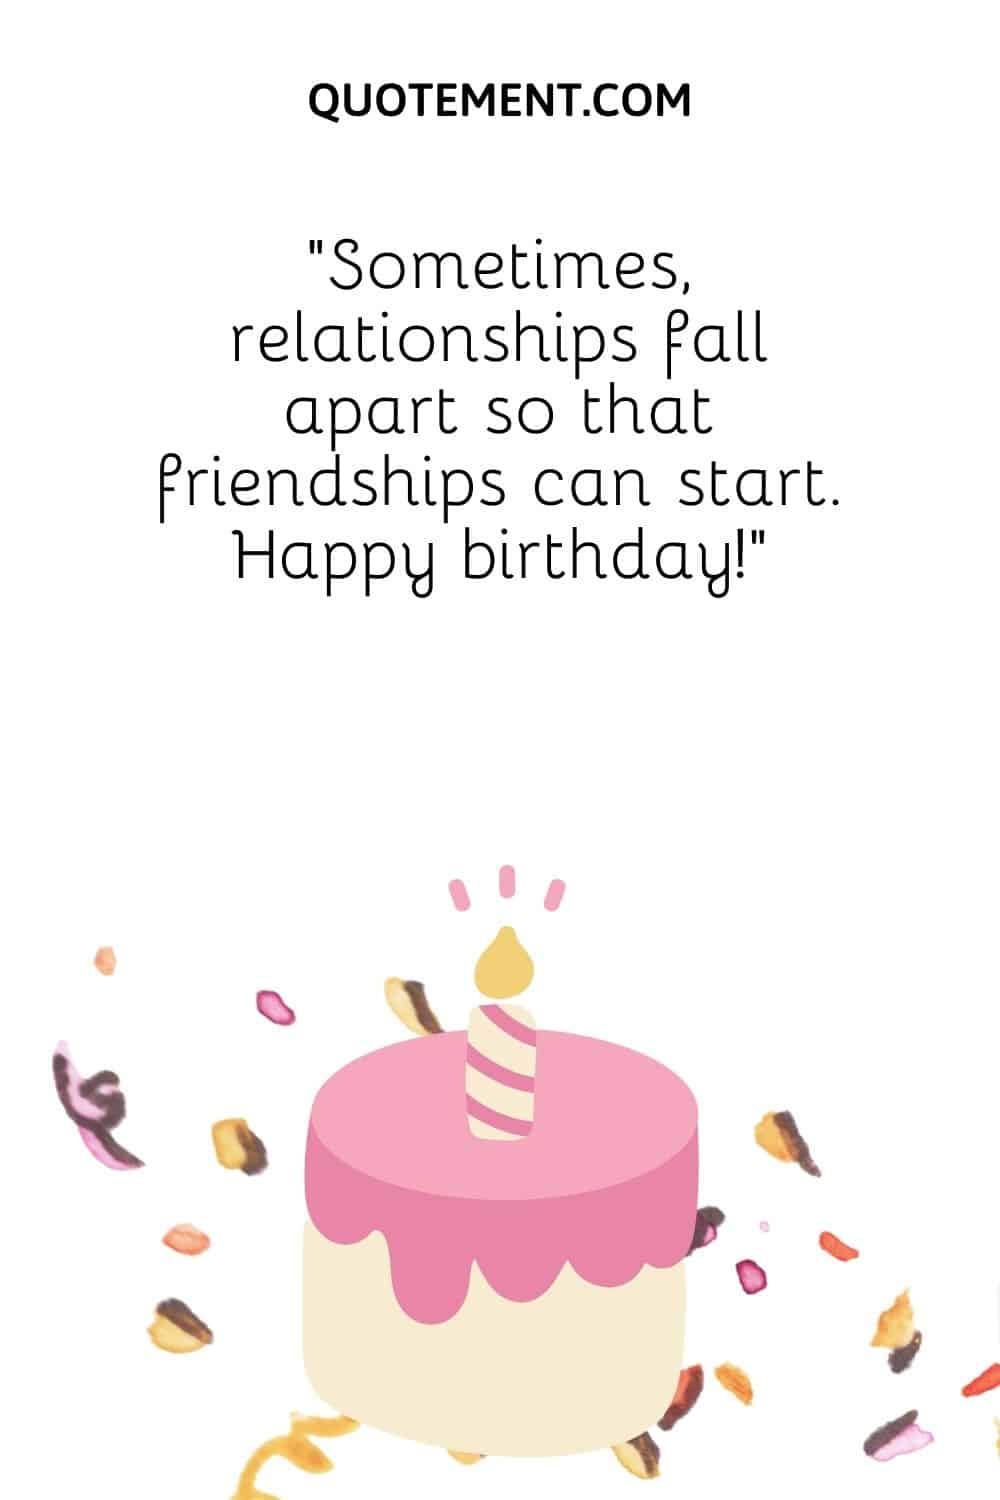 “Sometimes, relationships fall apart so that friendships can start. Happy birthday!” 